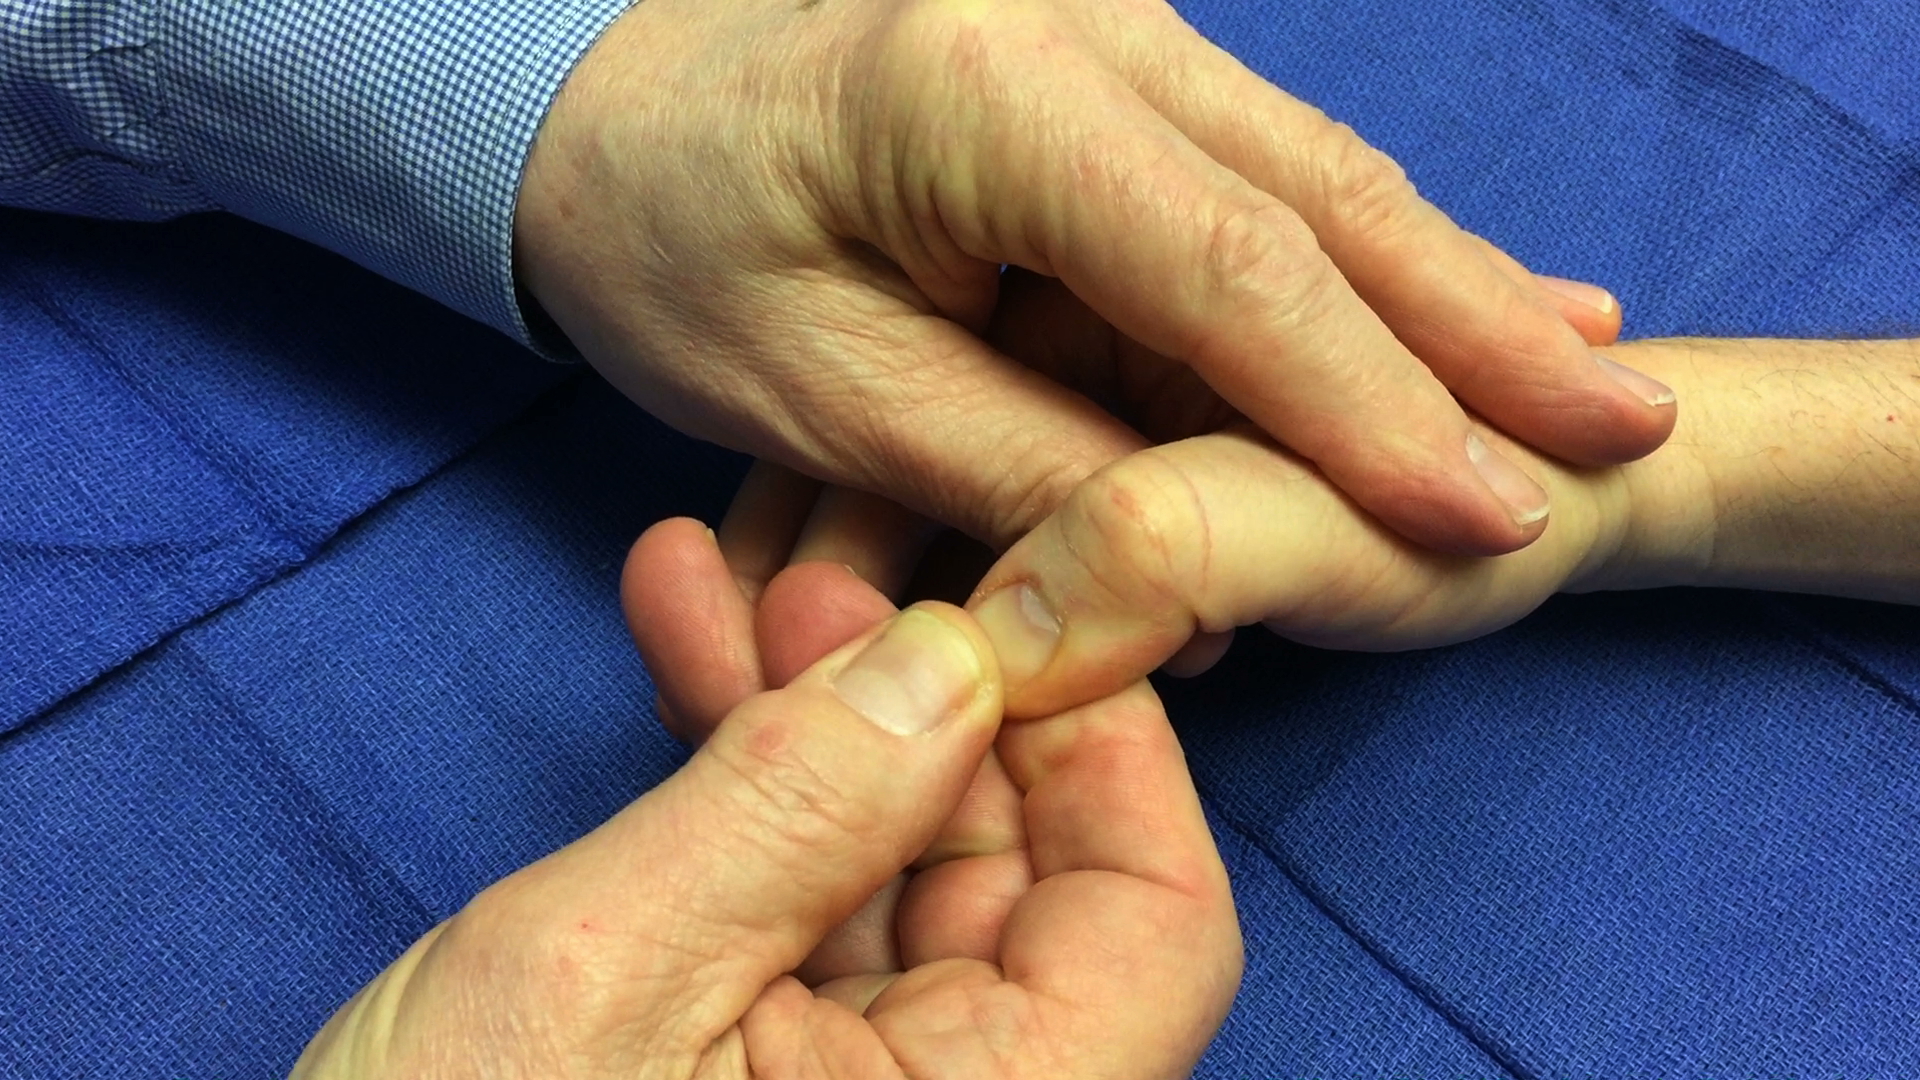 slide your finger distally on the fingernail while maintaining the pressure